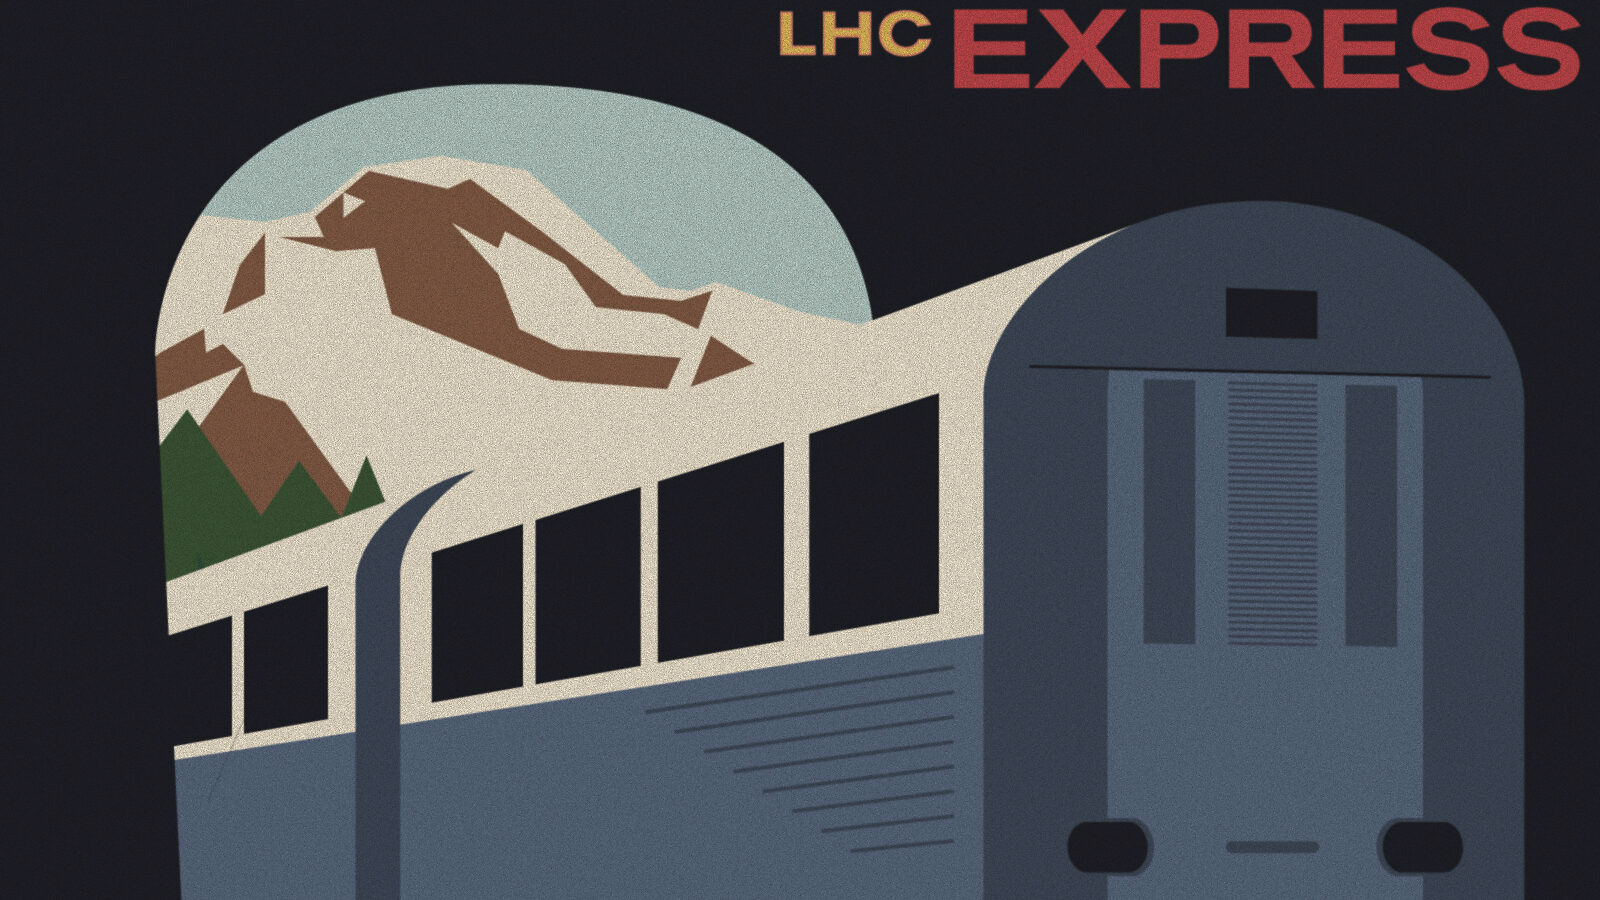 "LHC Express" illustration of a train that looks like a vintage postcard